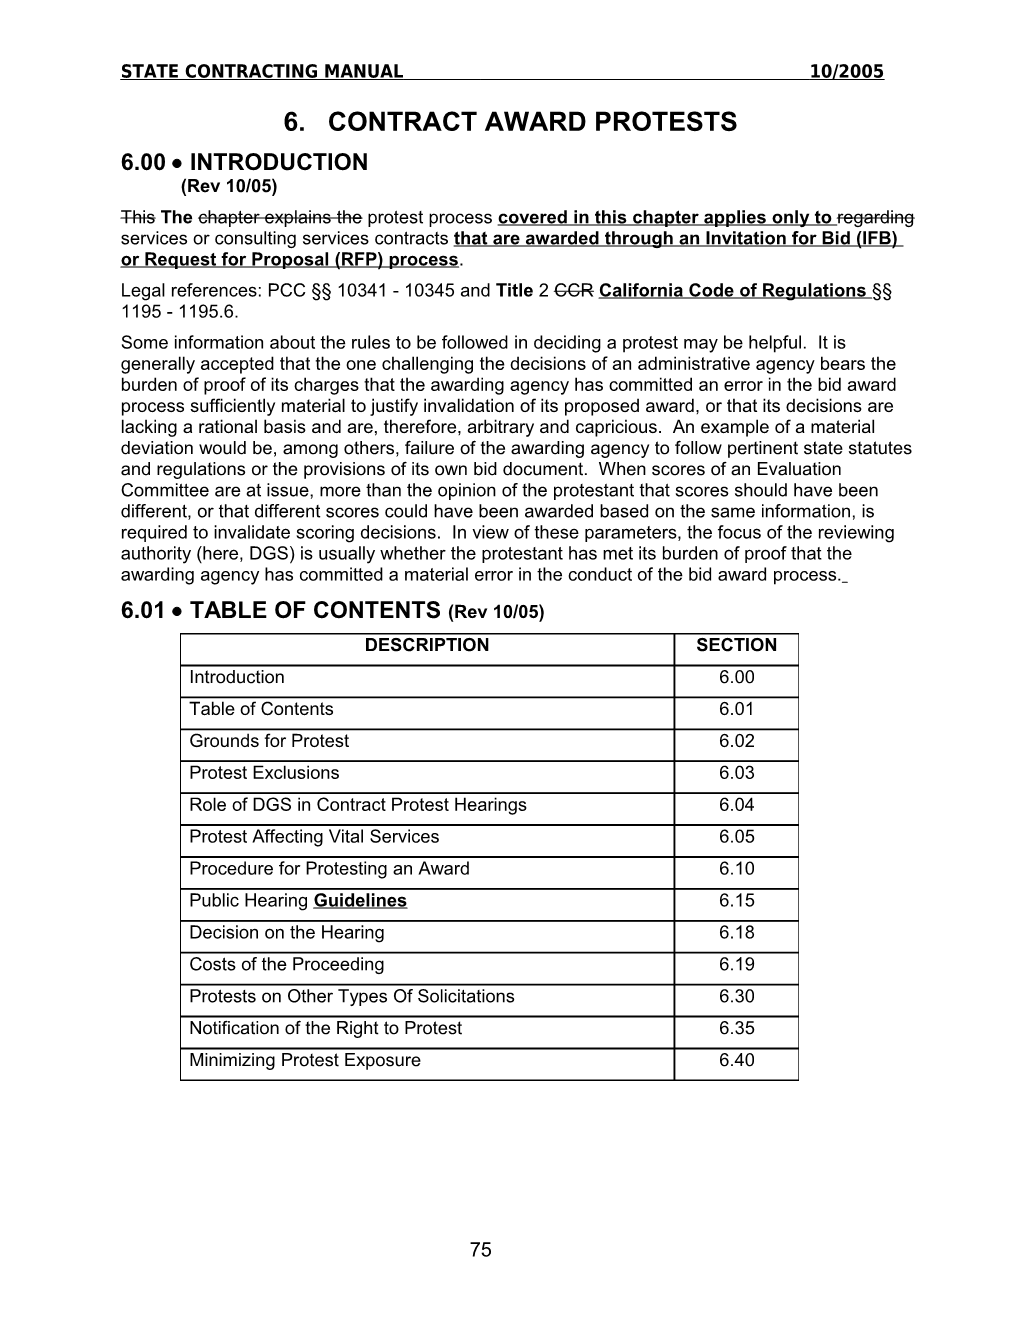 State Contracting Manual10/2005